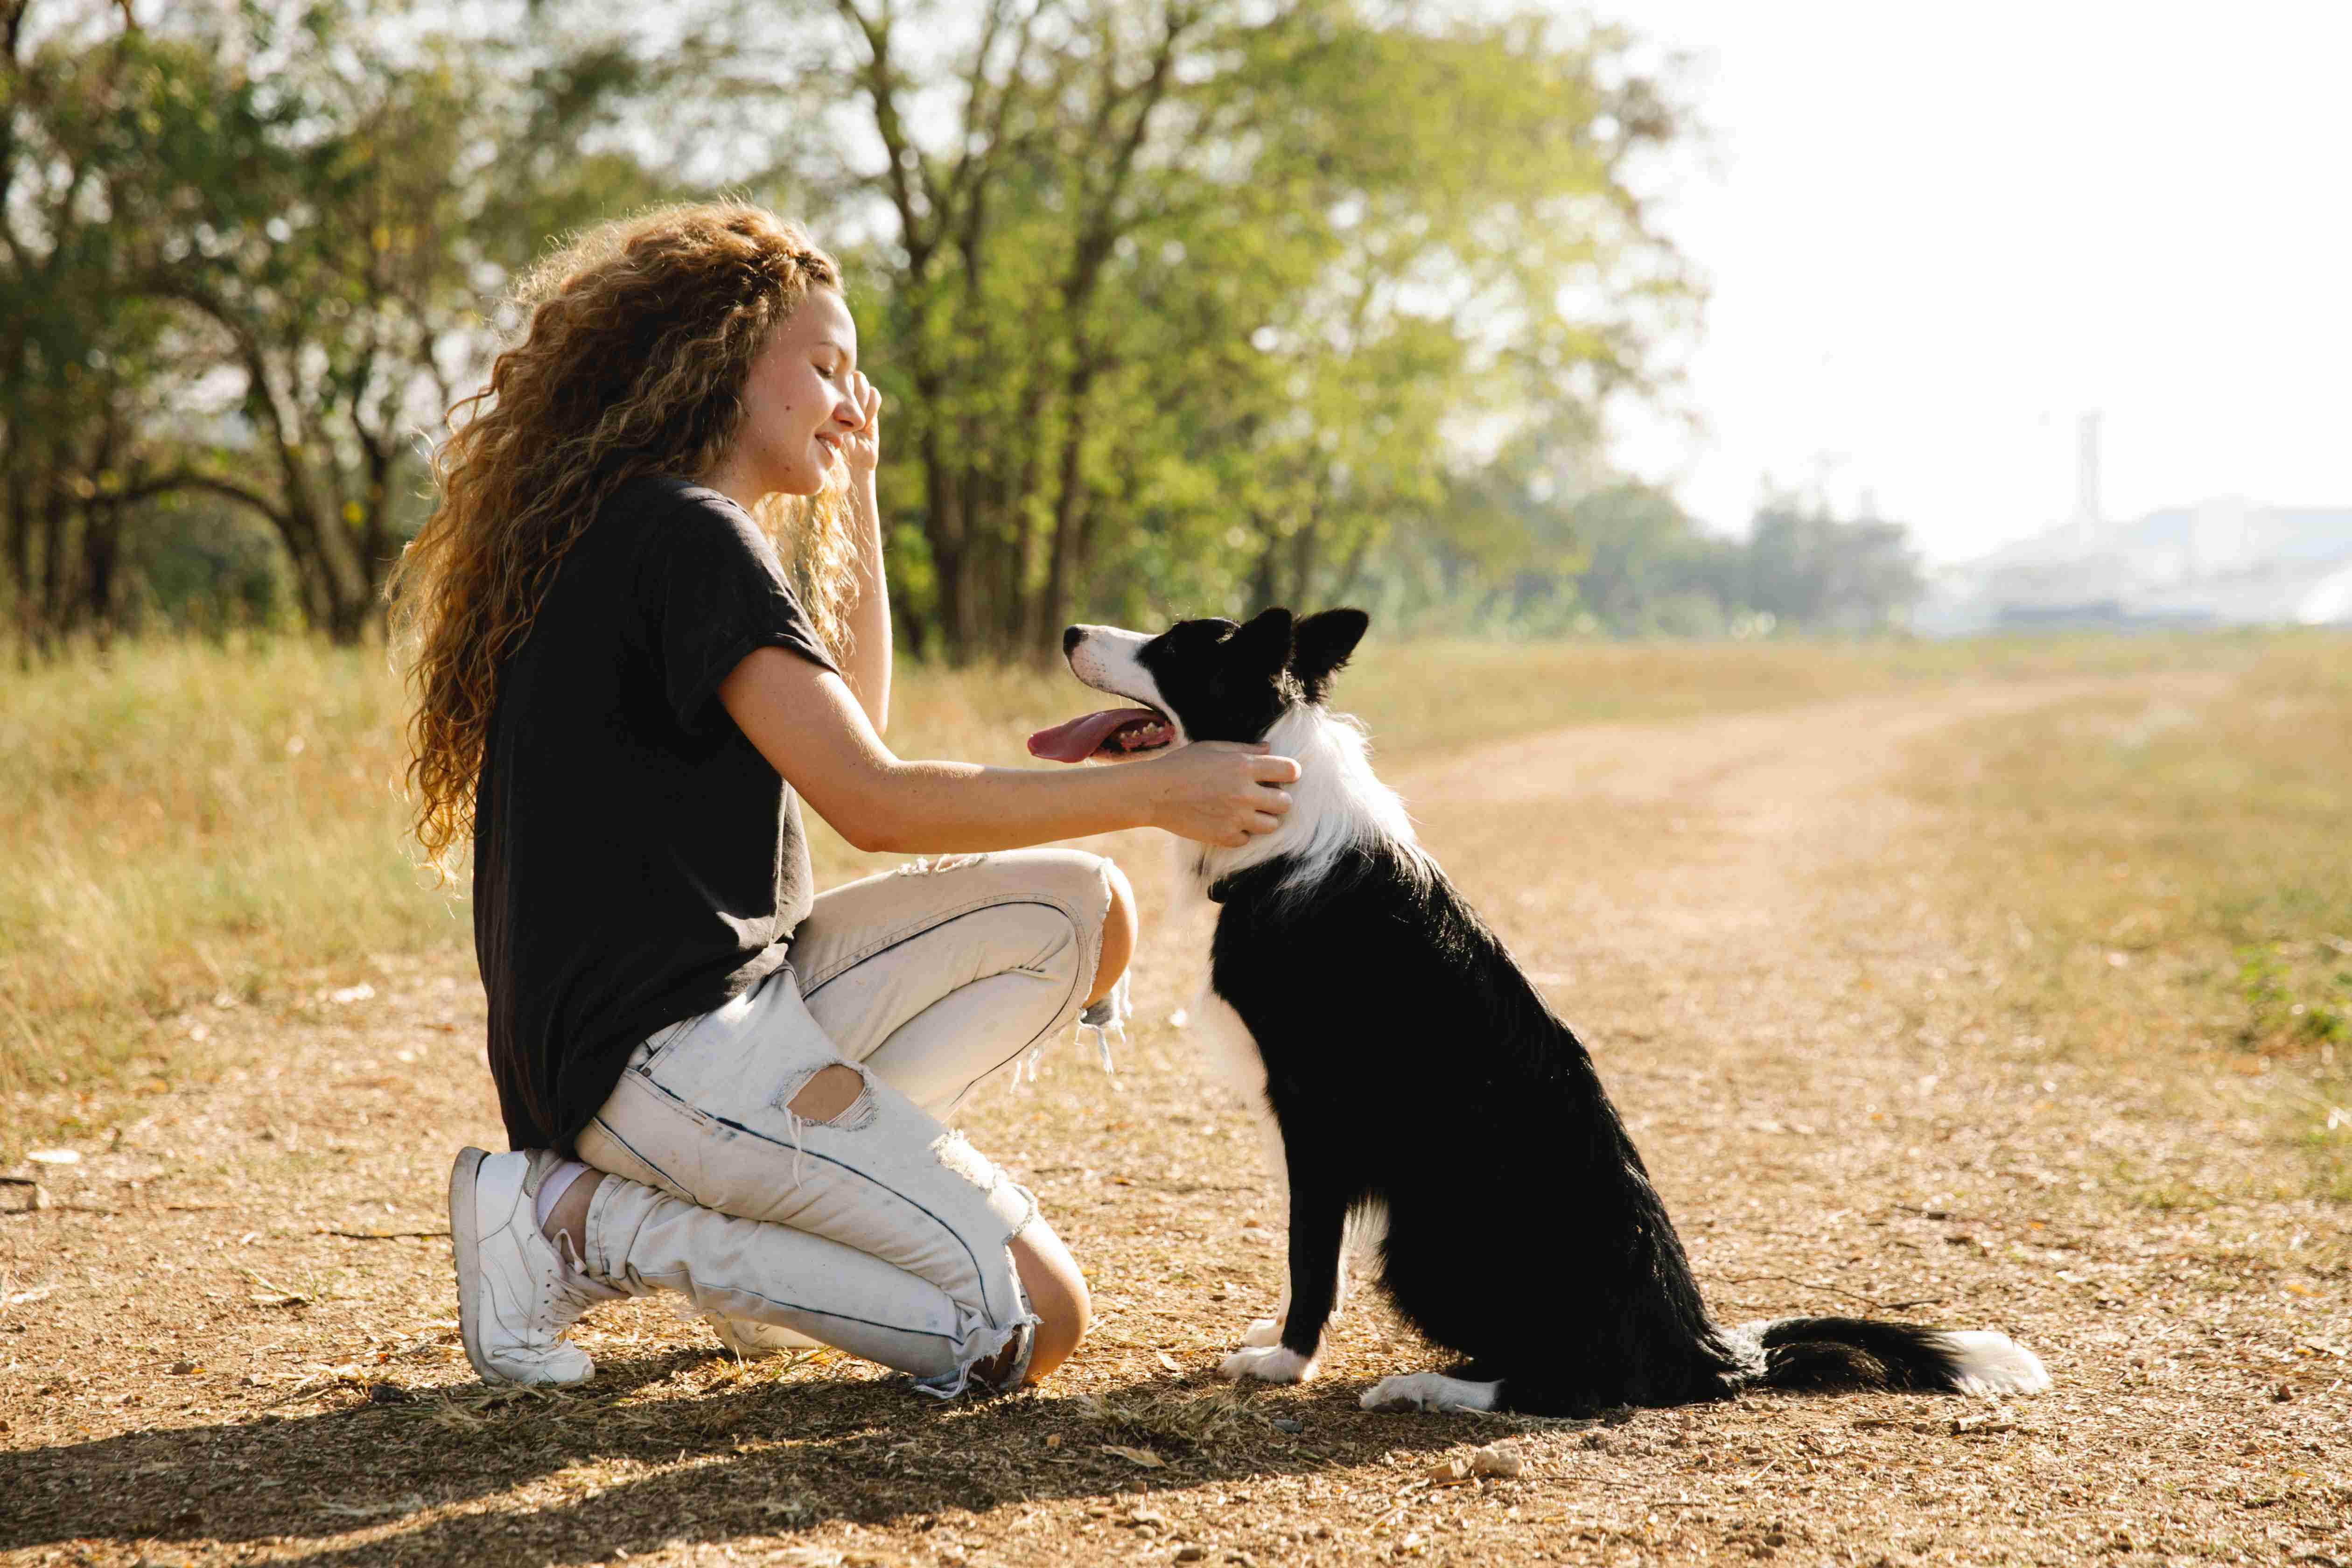 Border Collies vs Other Breeds: Which Dogs are Best Suited for Different Living Situations?